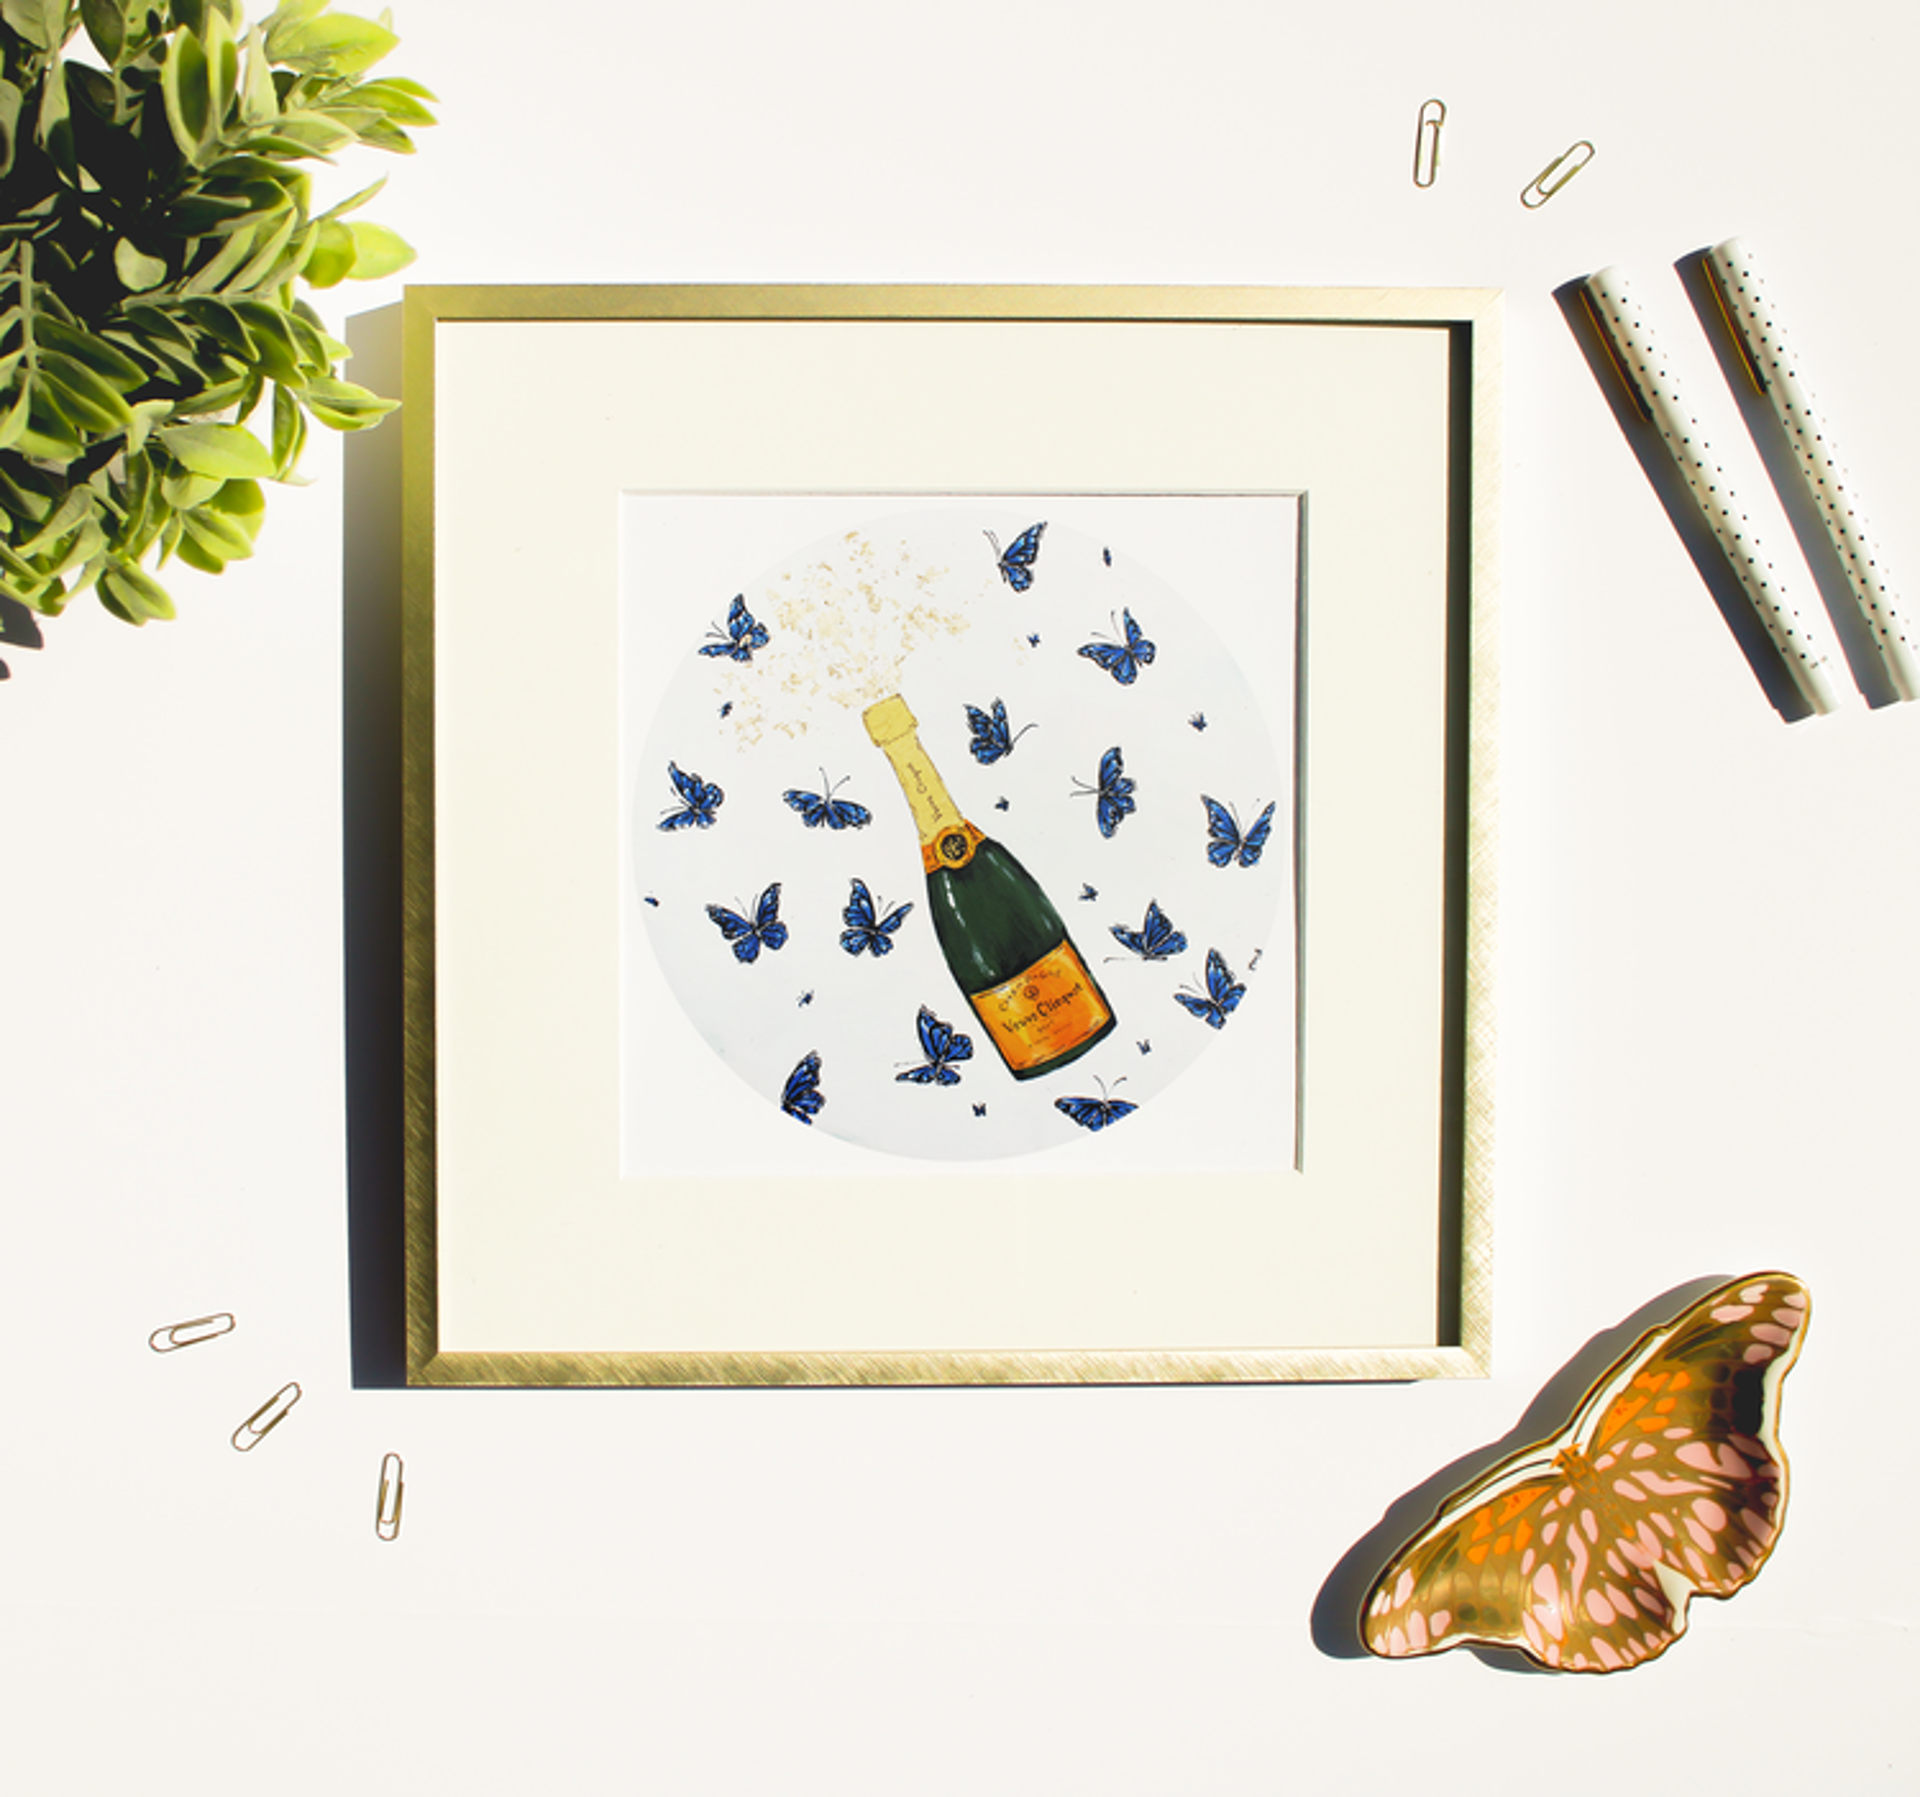 Veuve Clicquot with Butterflies Inv. # 2 by Cora Barhorst